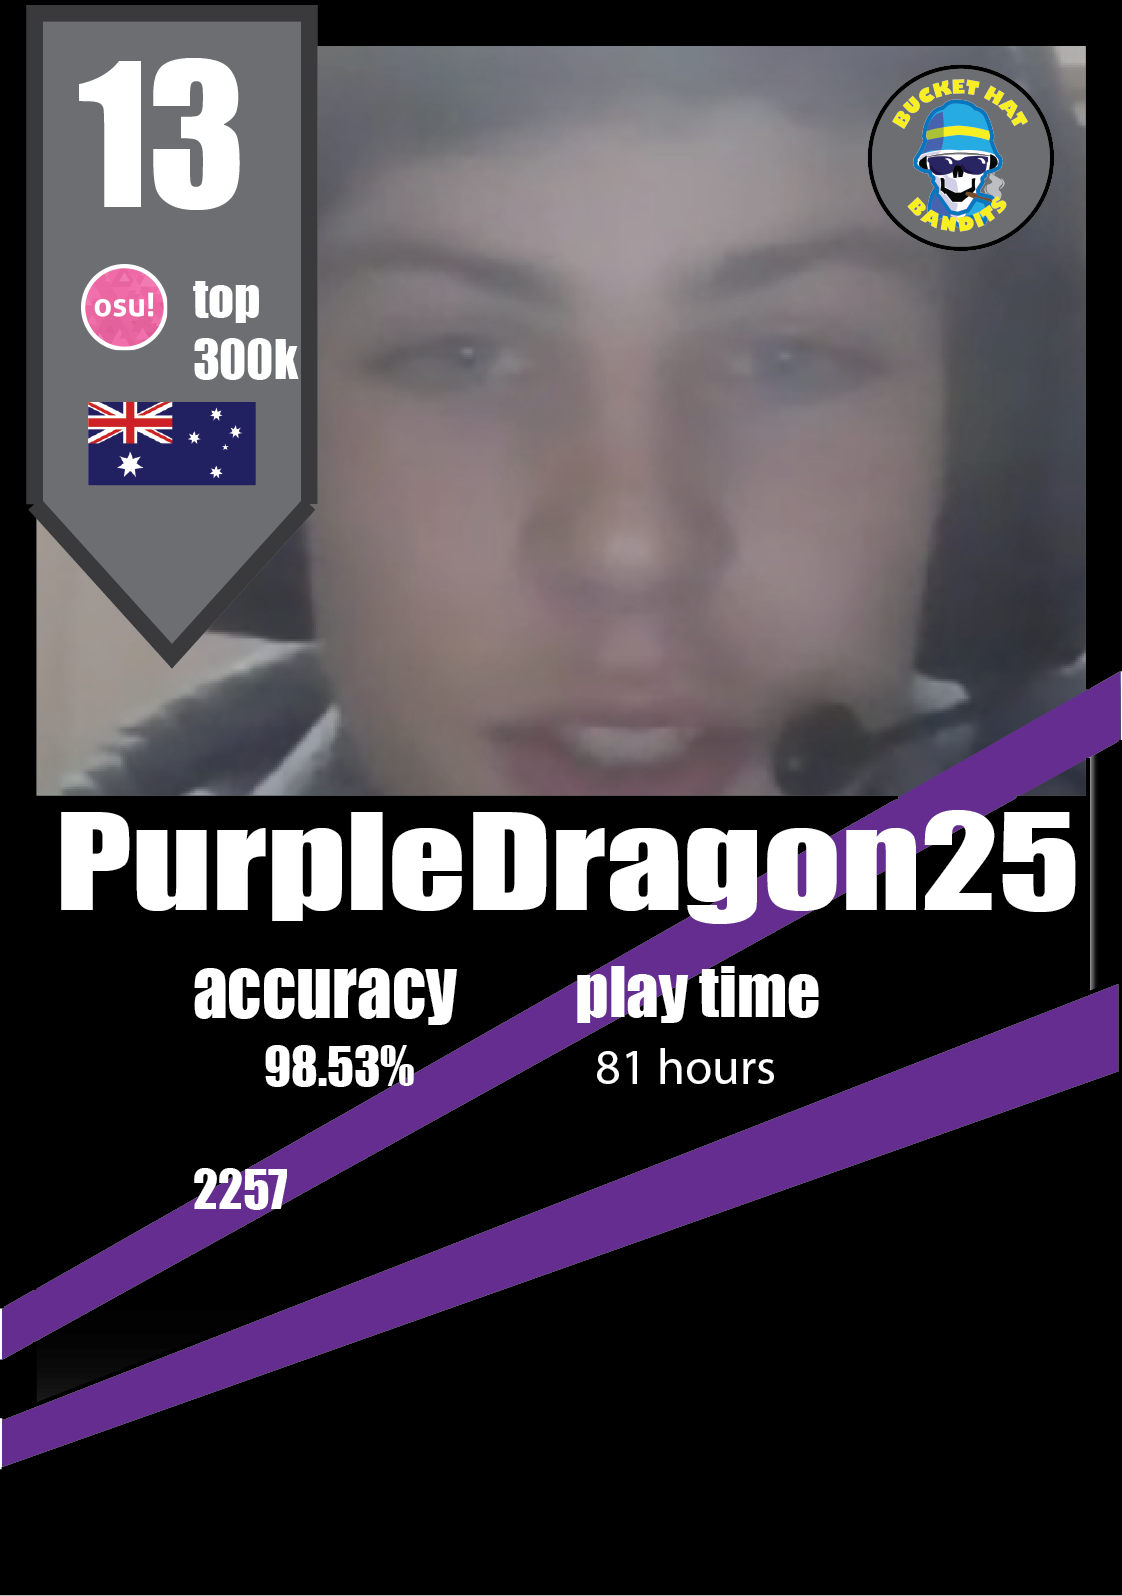 # Player Card